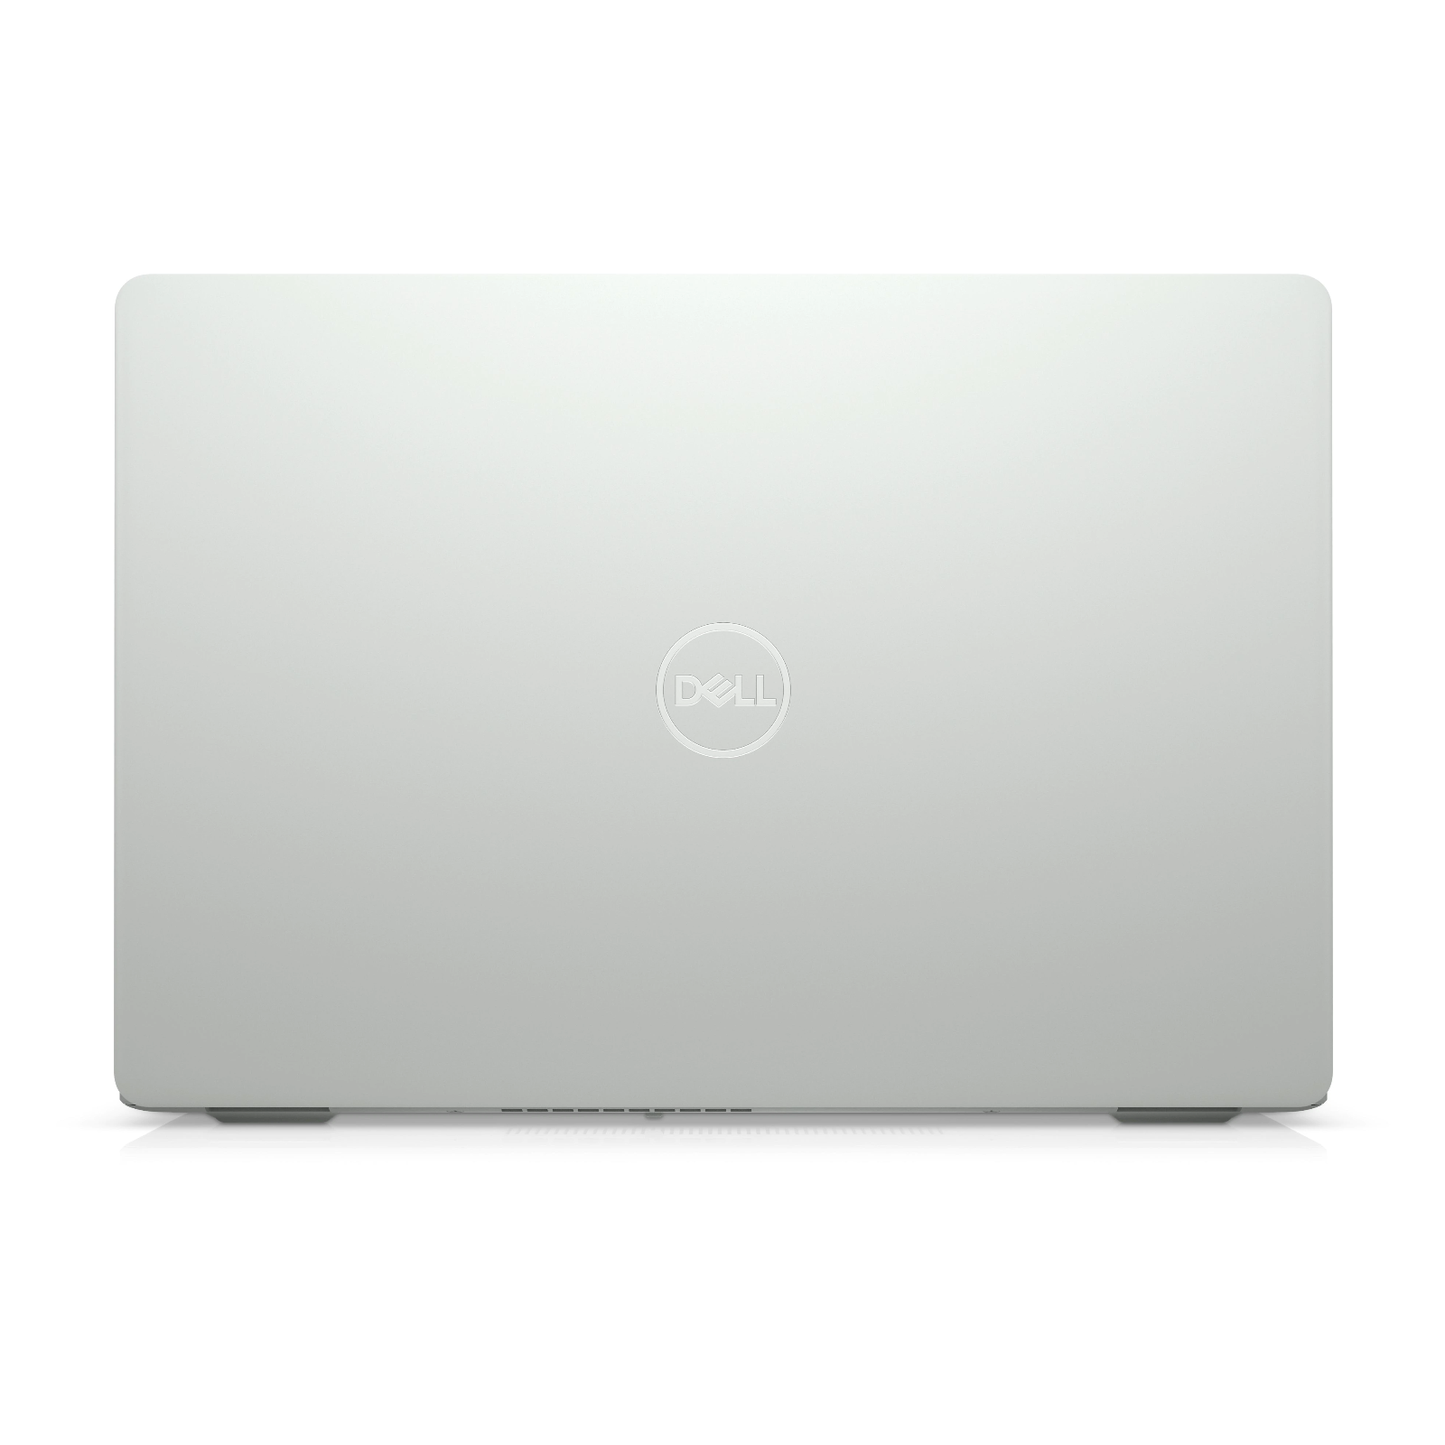 Dell Inspiron 3501 Silver Core i3-1115g4 Laptop Offers (New OB)